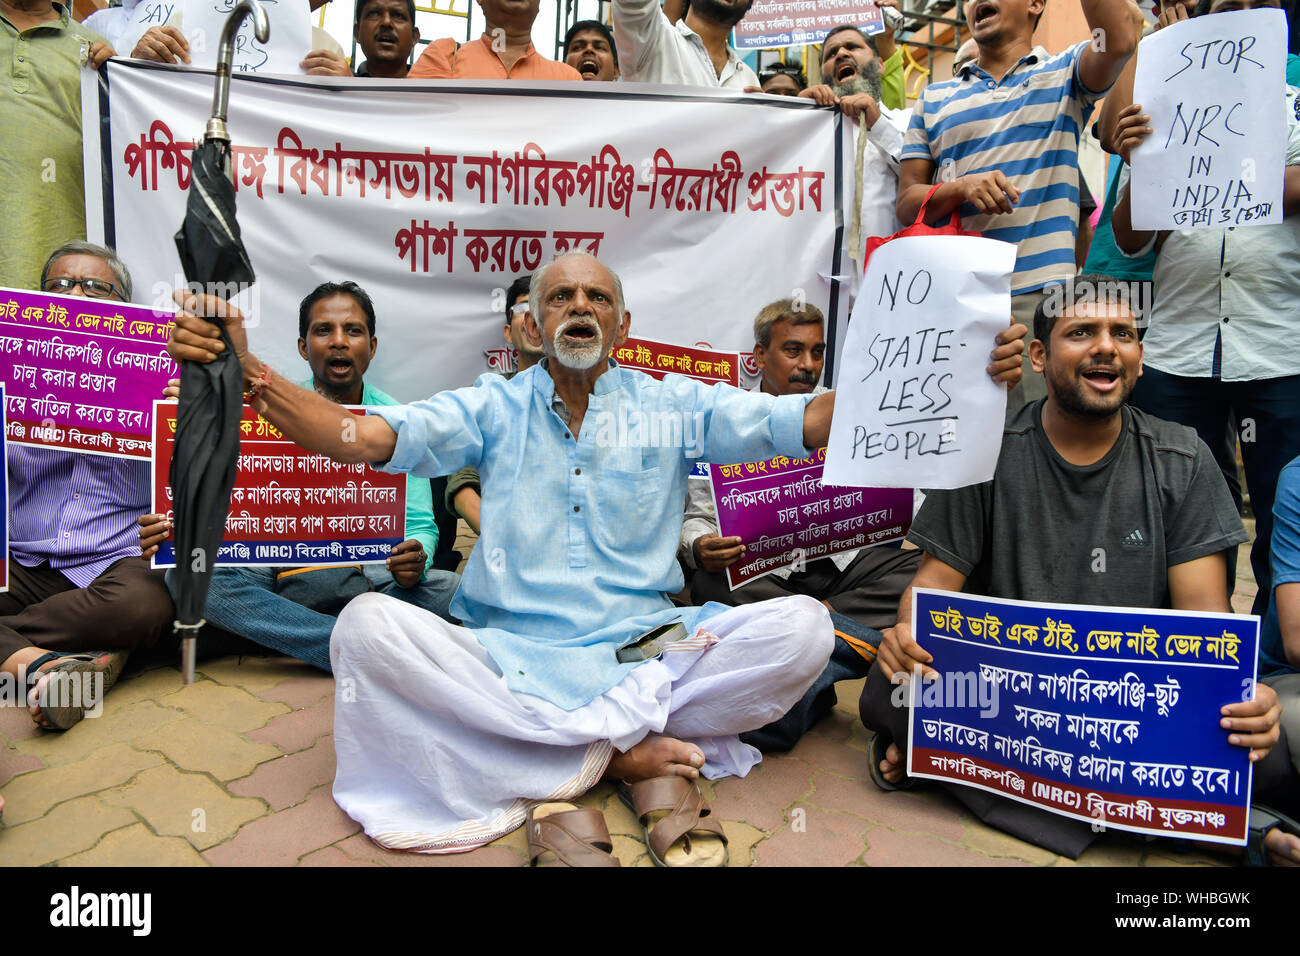 Protesters hold placards and banners while shouting slogans during a demonstration against National Register of Citizens (NRC) in kolkata.The National Register of Citizens (NRC), is the list of Indian citizens in Assam which is being updated to weed out illegal immigration from Bangladesh and neighbouring regions. Stock Photo